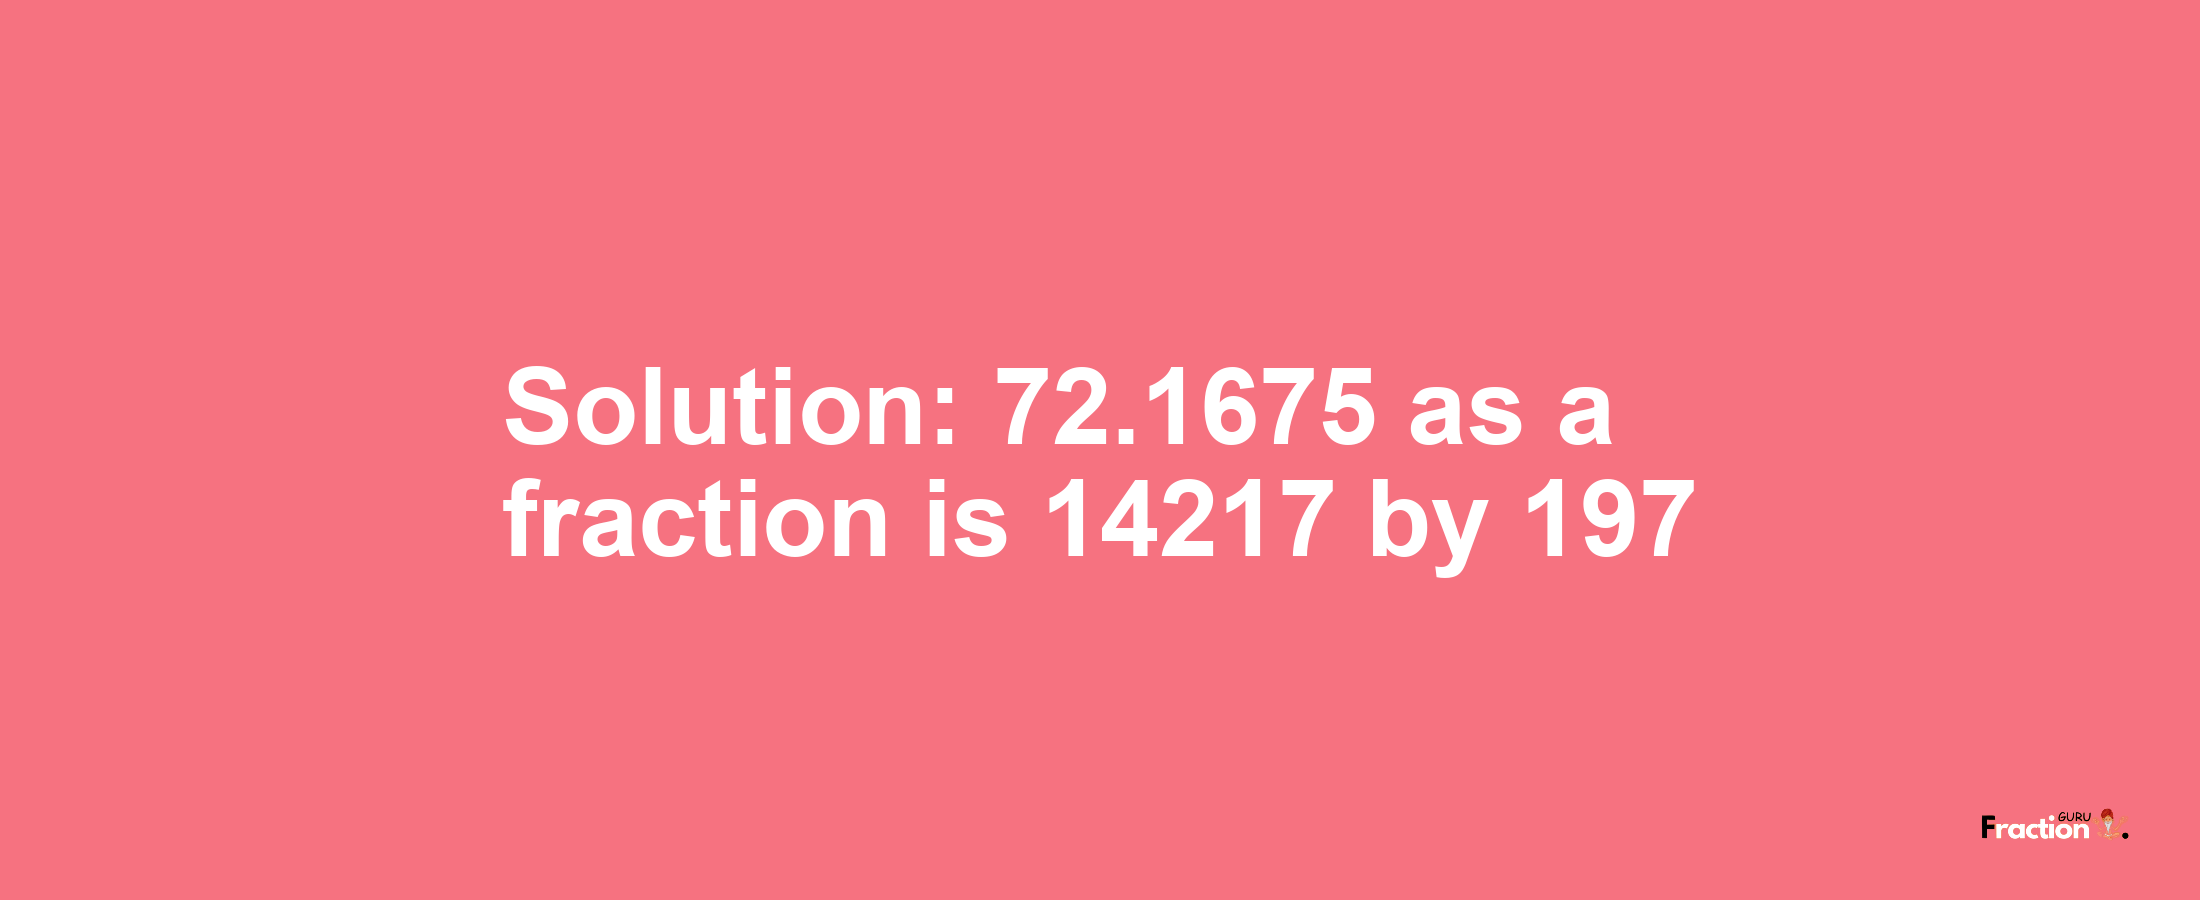 Solution:72.1675 as a fraction is 14217/197